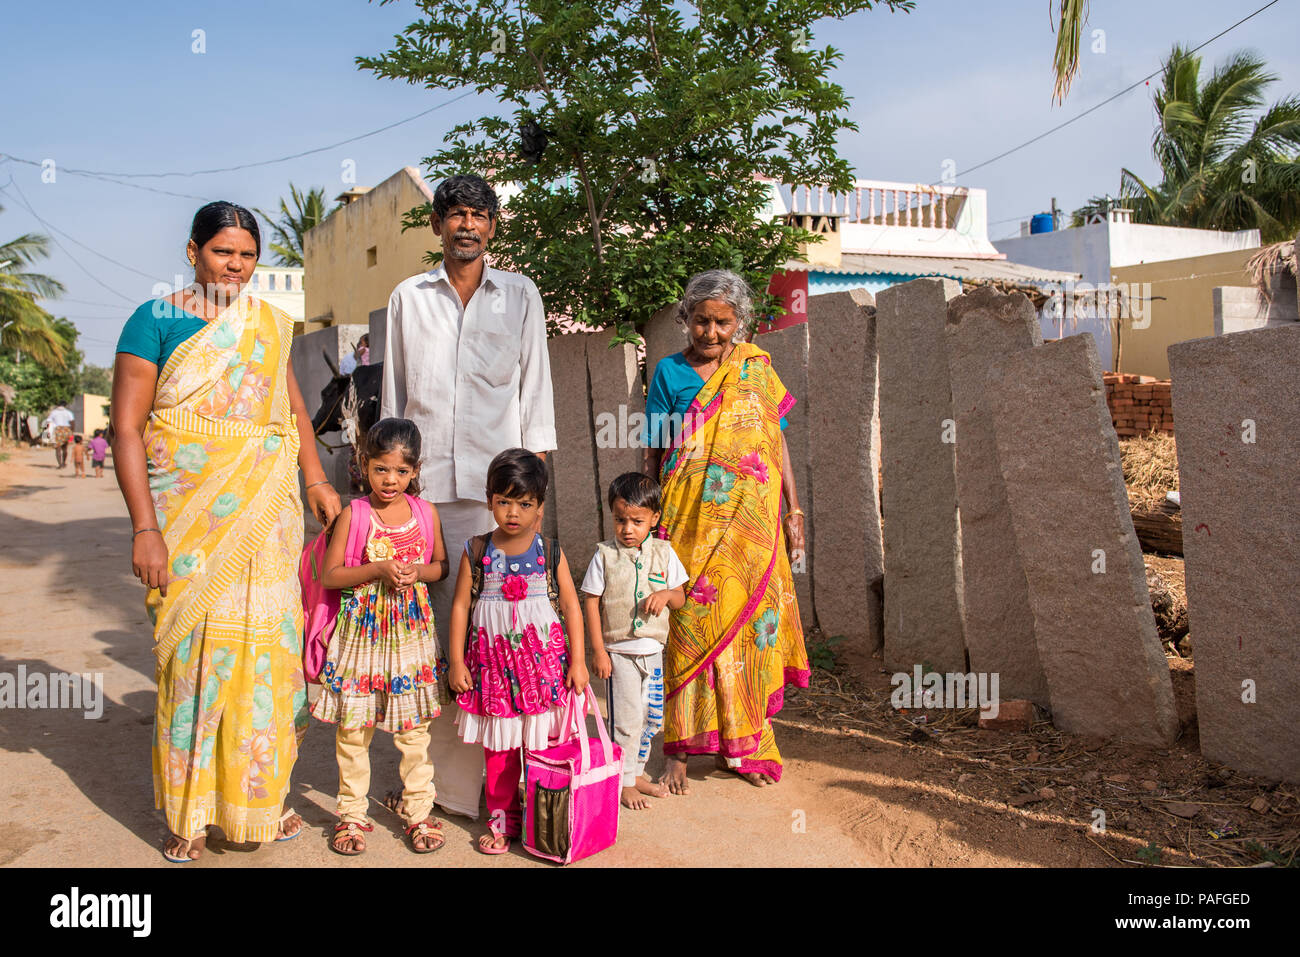 PUTTAPARTHI, ANDHRA PRADESH, INDIA - JULY 9, 2017: Indian family in a village street. Copy space for text Stock Photo